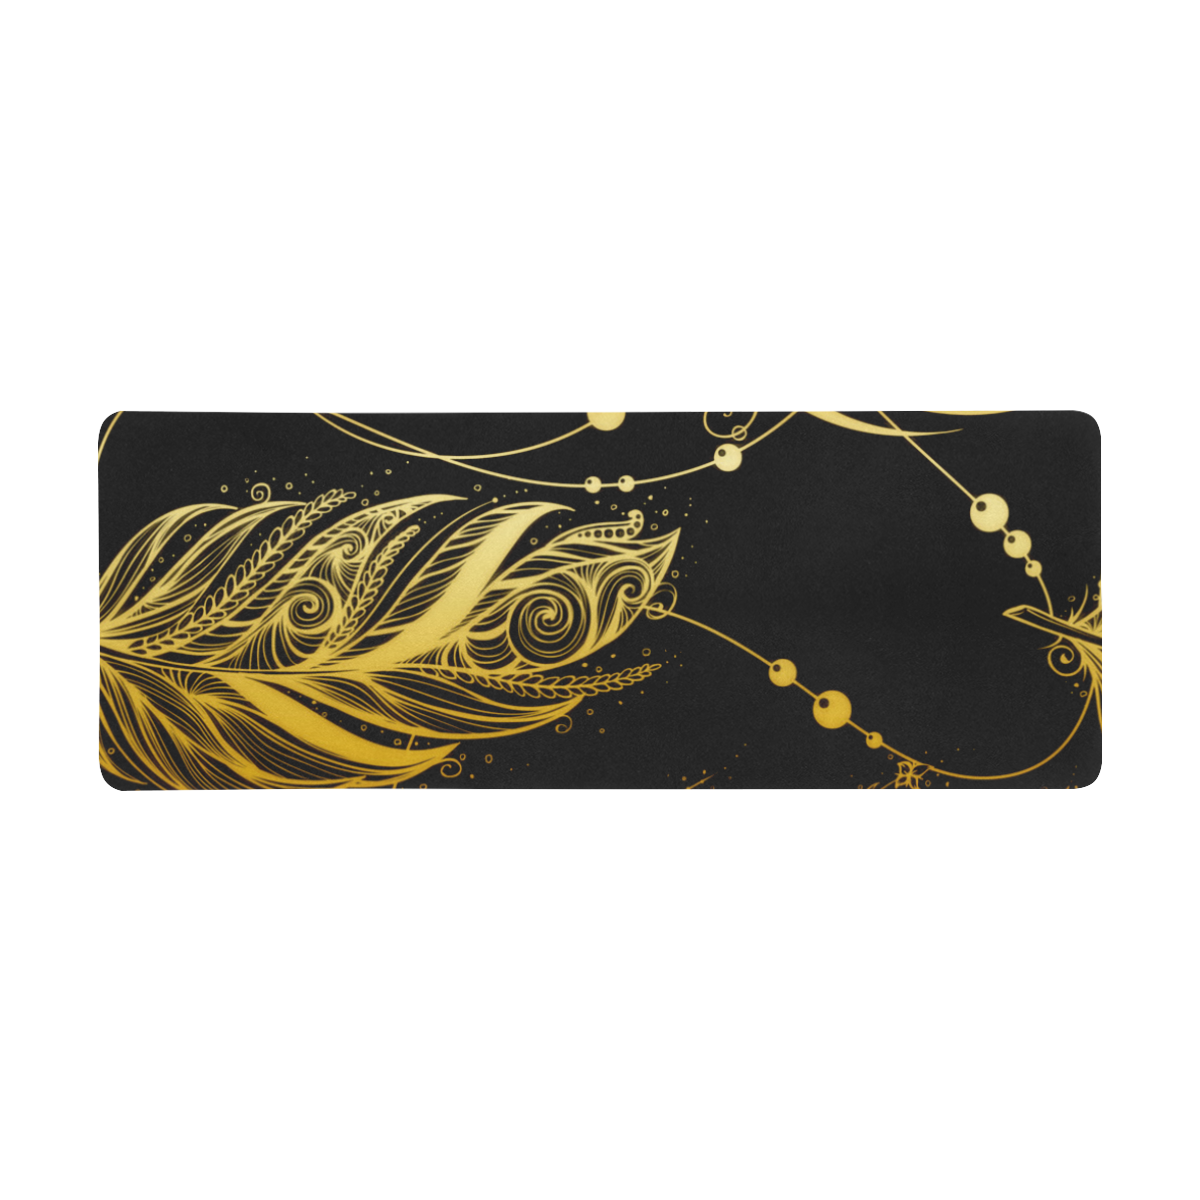 Golden Feathers Gaming Mousepad (31"x12")